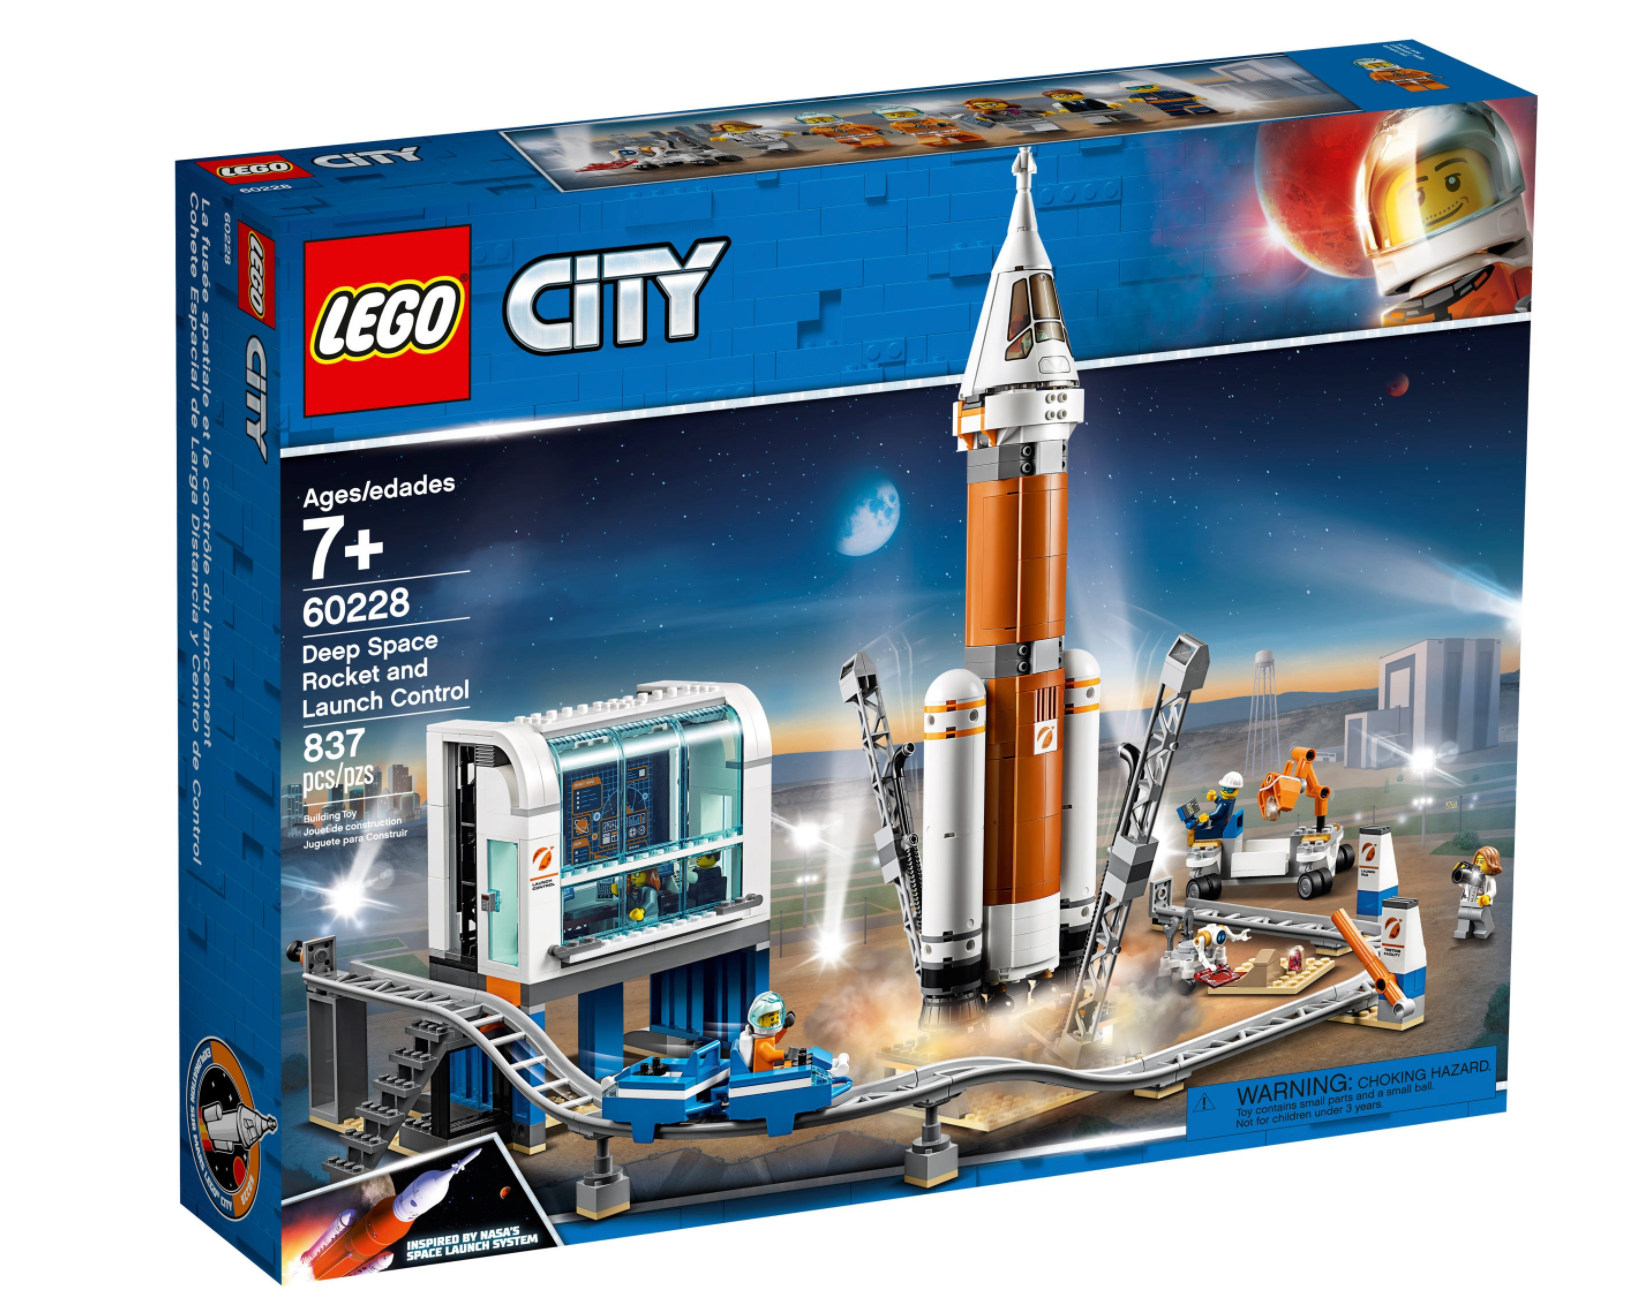 LEGO: City - Deep Space Rocket and Launch Control